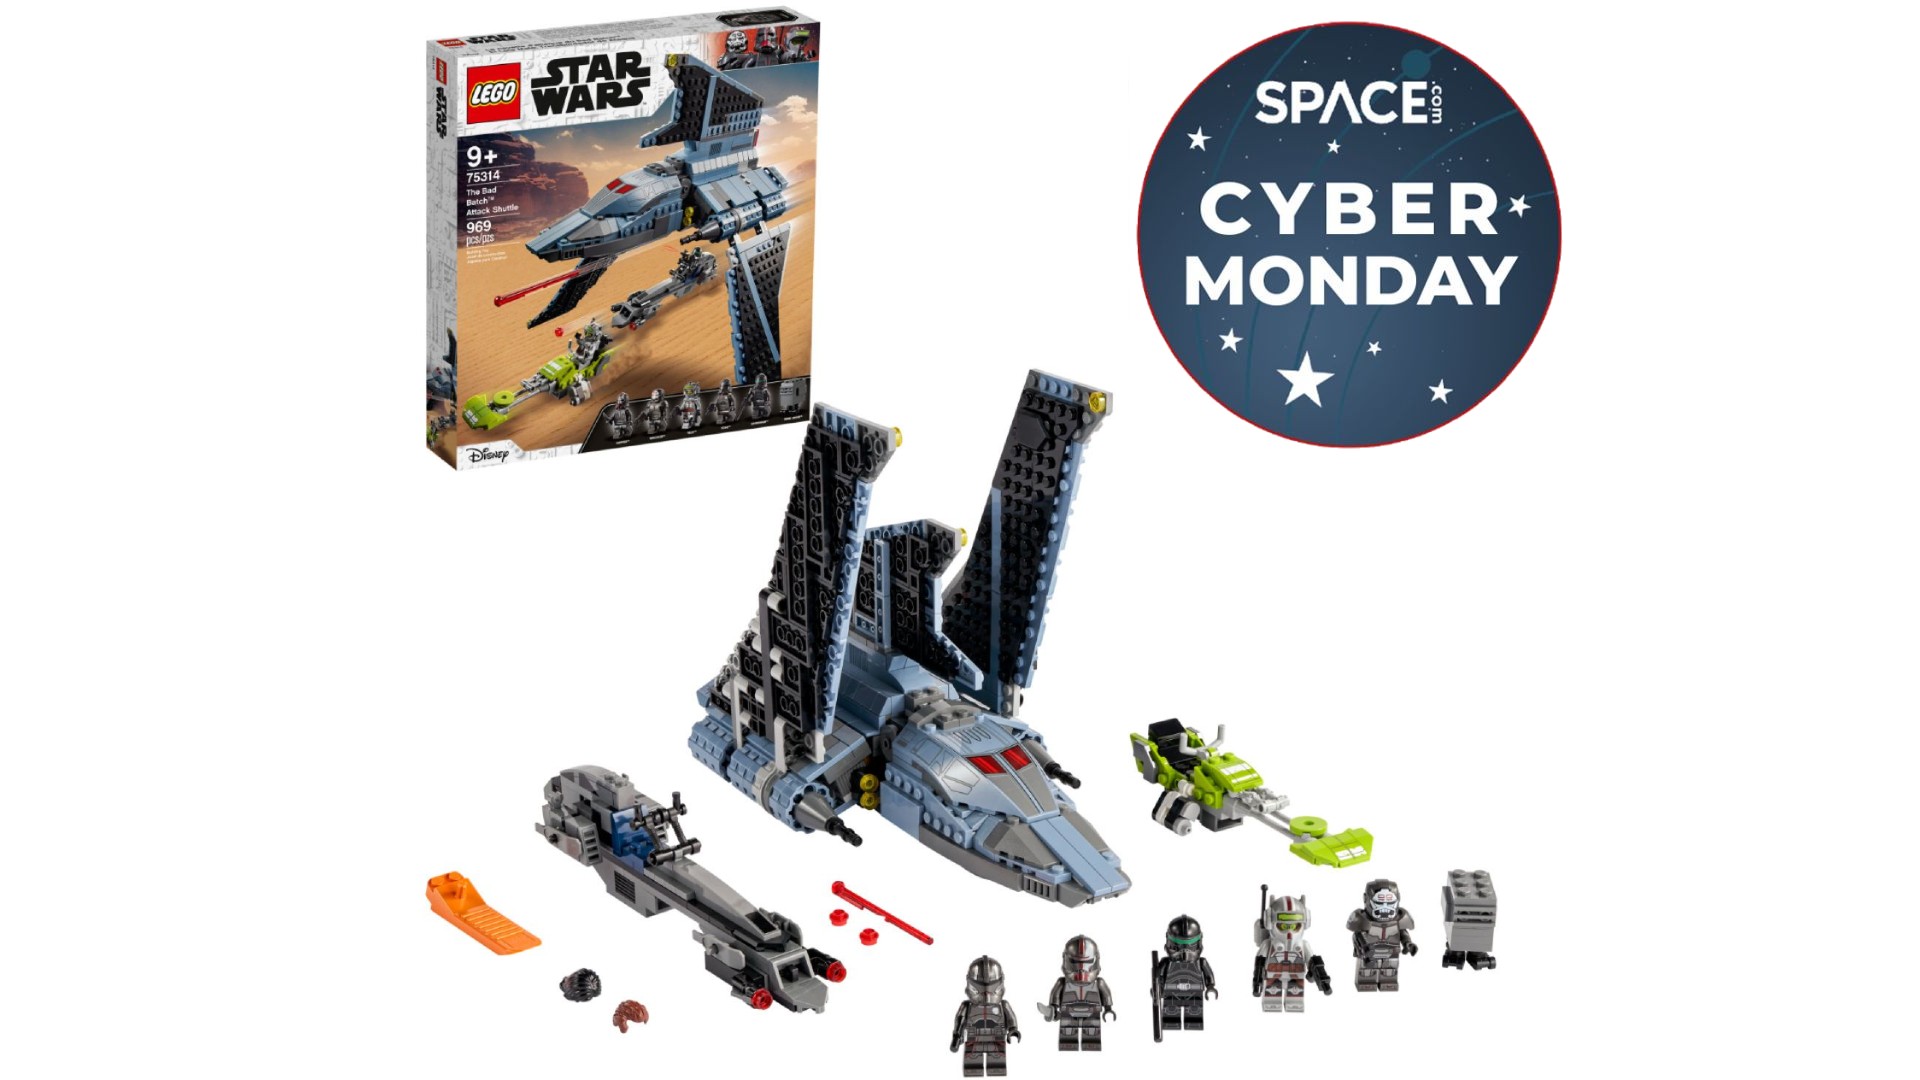 You can still save $20 on this Lego Star Wars The Bad Batch Attack Shuttle for Cyber Monday